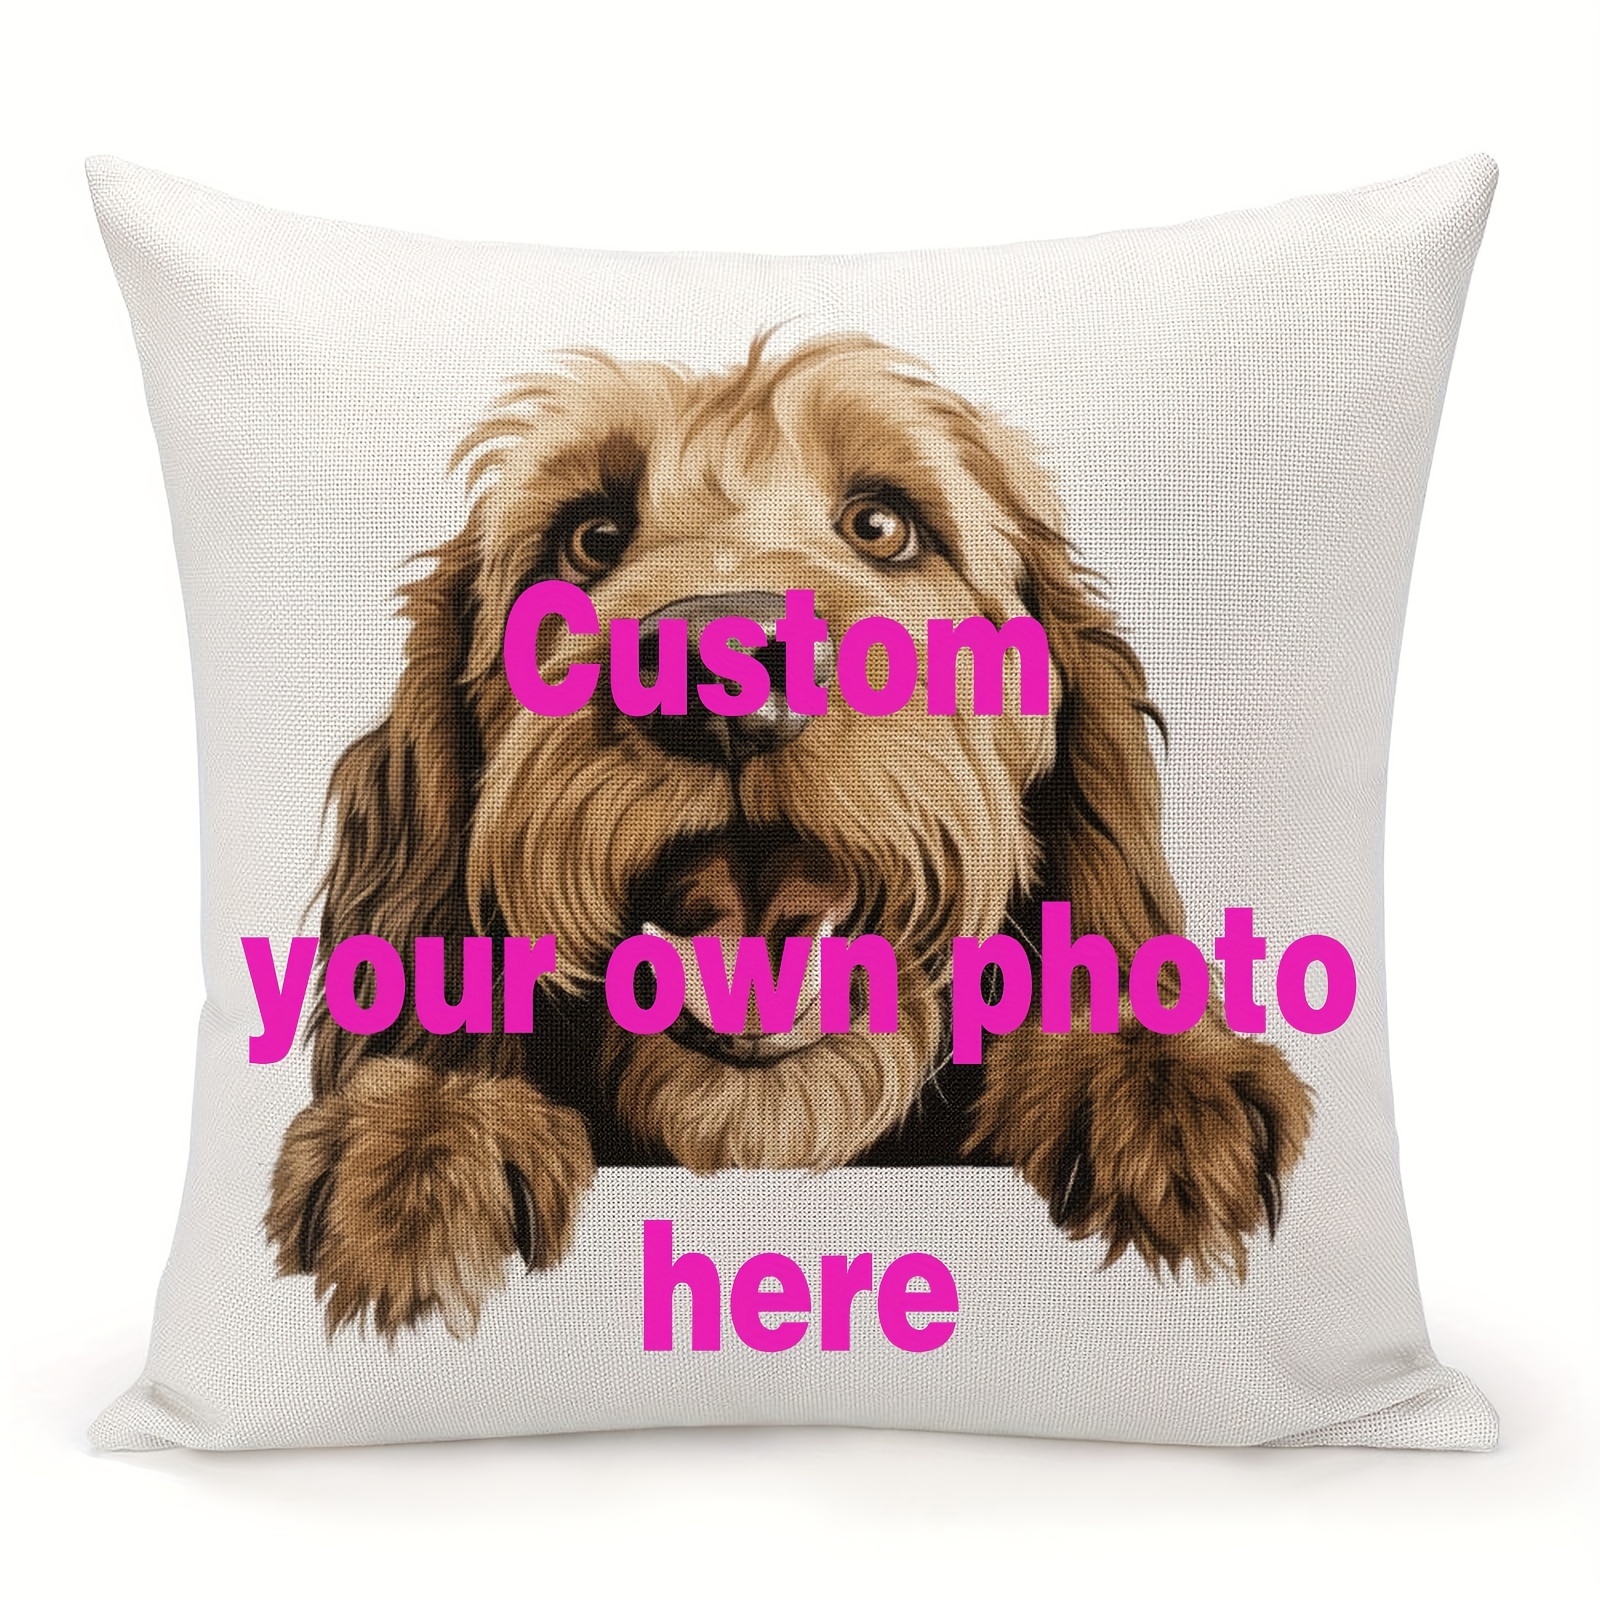 

1pc Personalized Dog Throw Pillow, Custom Dog Photo Pillow With Insert, Pet Memorial Gifts For Dogs, Dog Remembrance Gift, Single Sided Soft Pet Stuffed Sleeping Cushion For House Decoration No Core